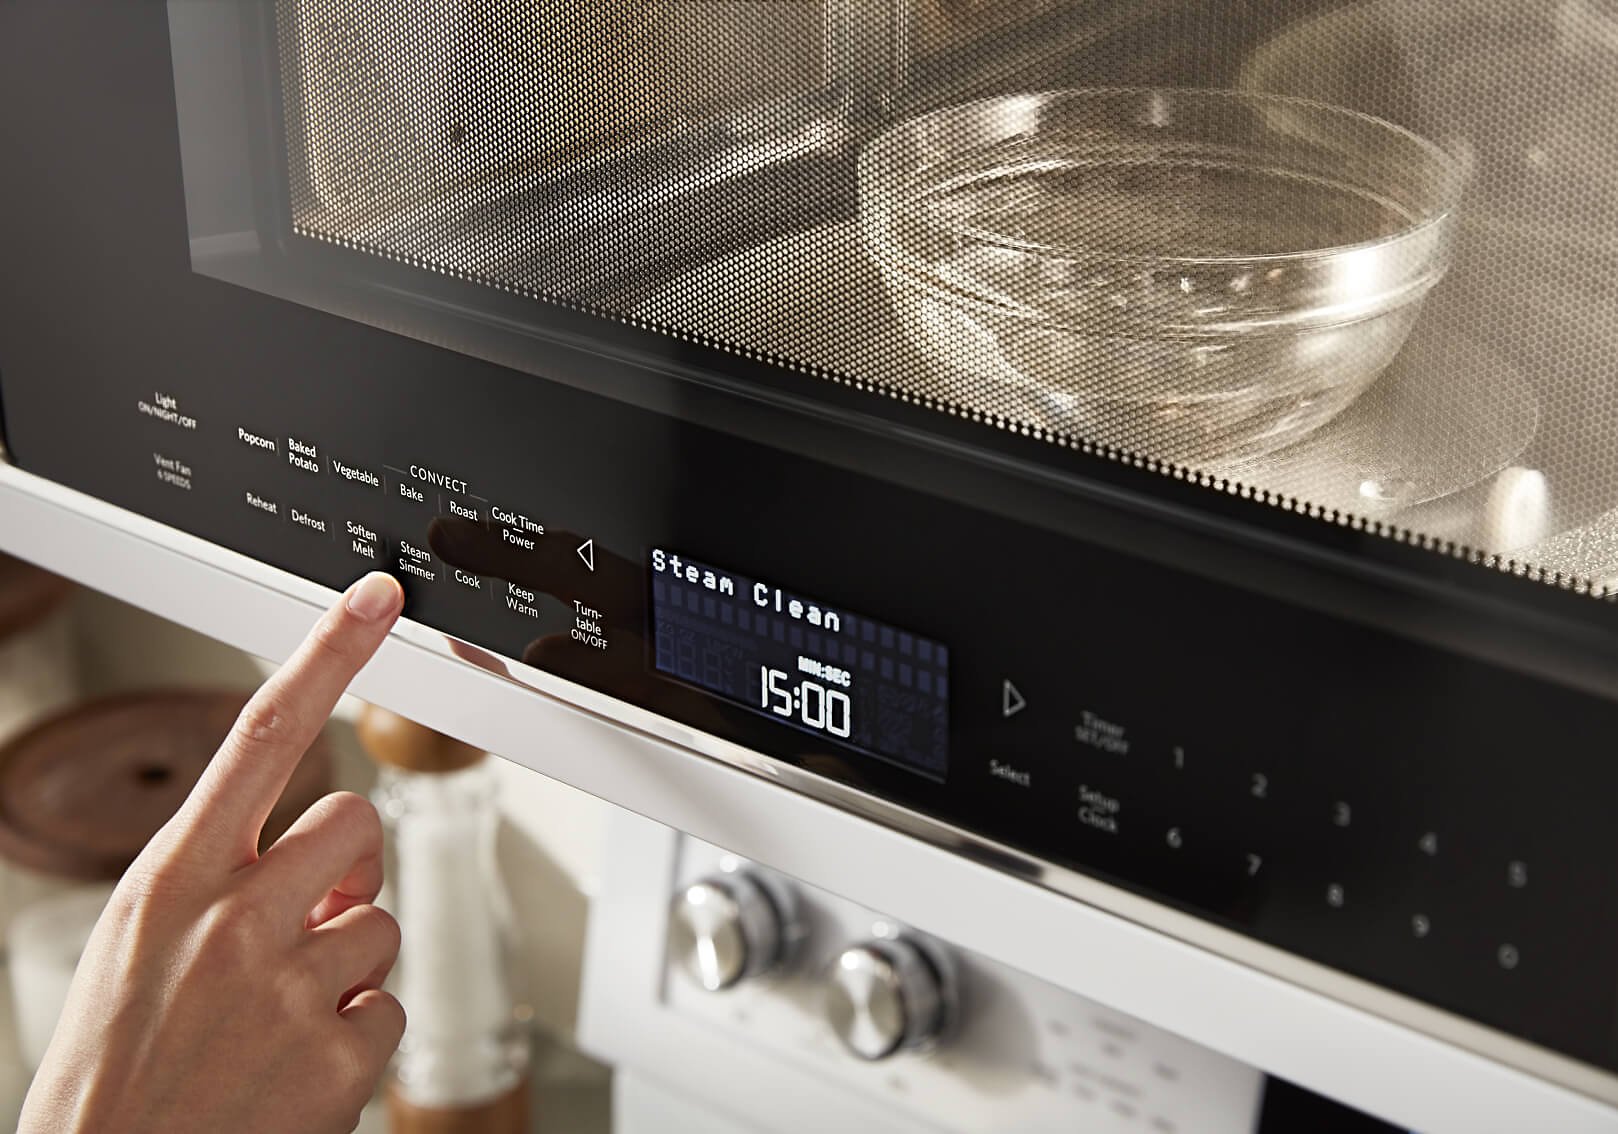 How to Clean a Microwave: 3 Easy Ways